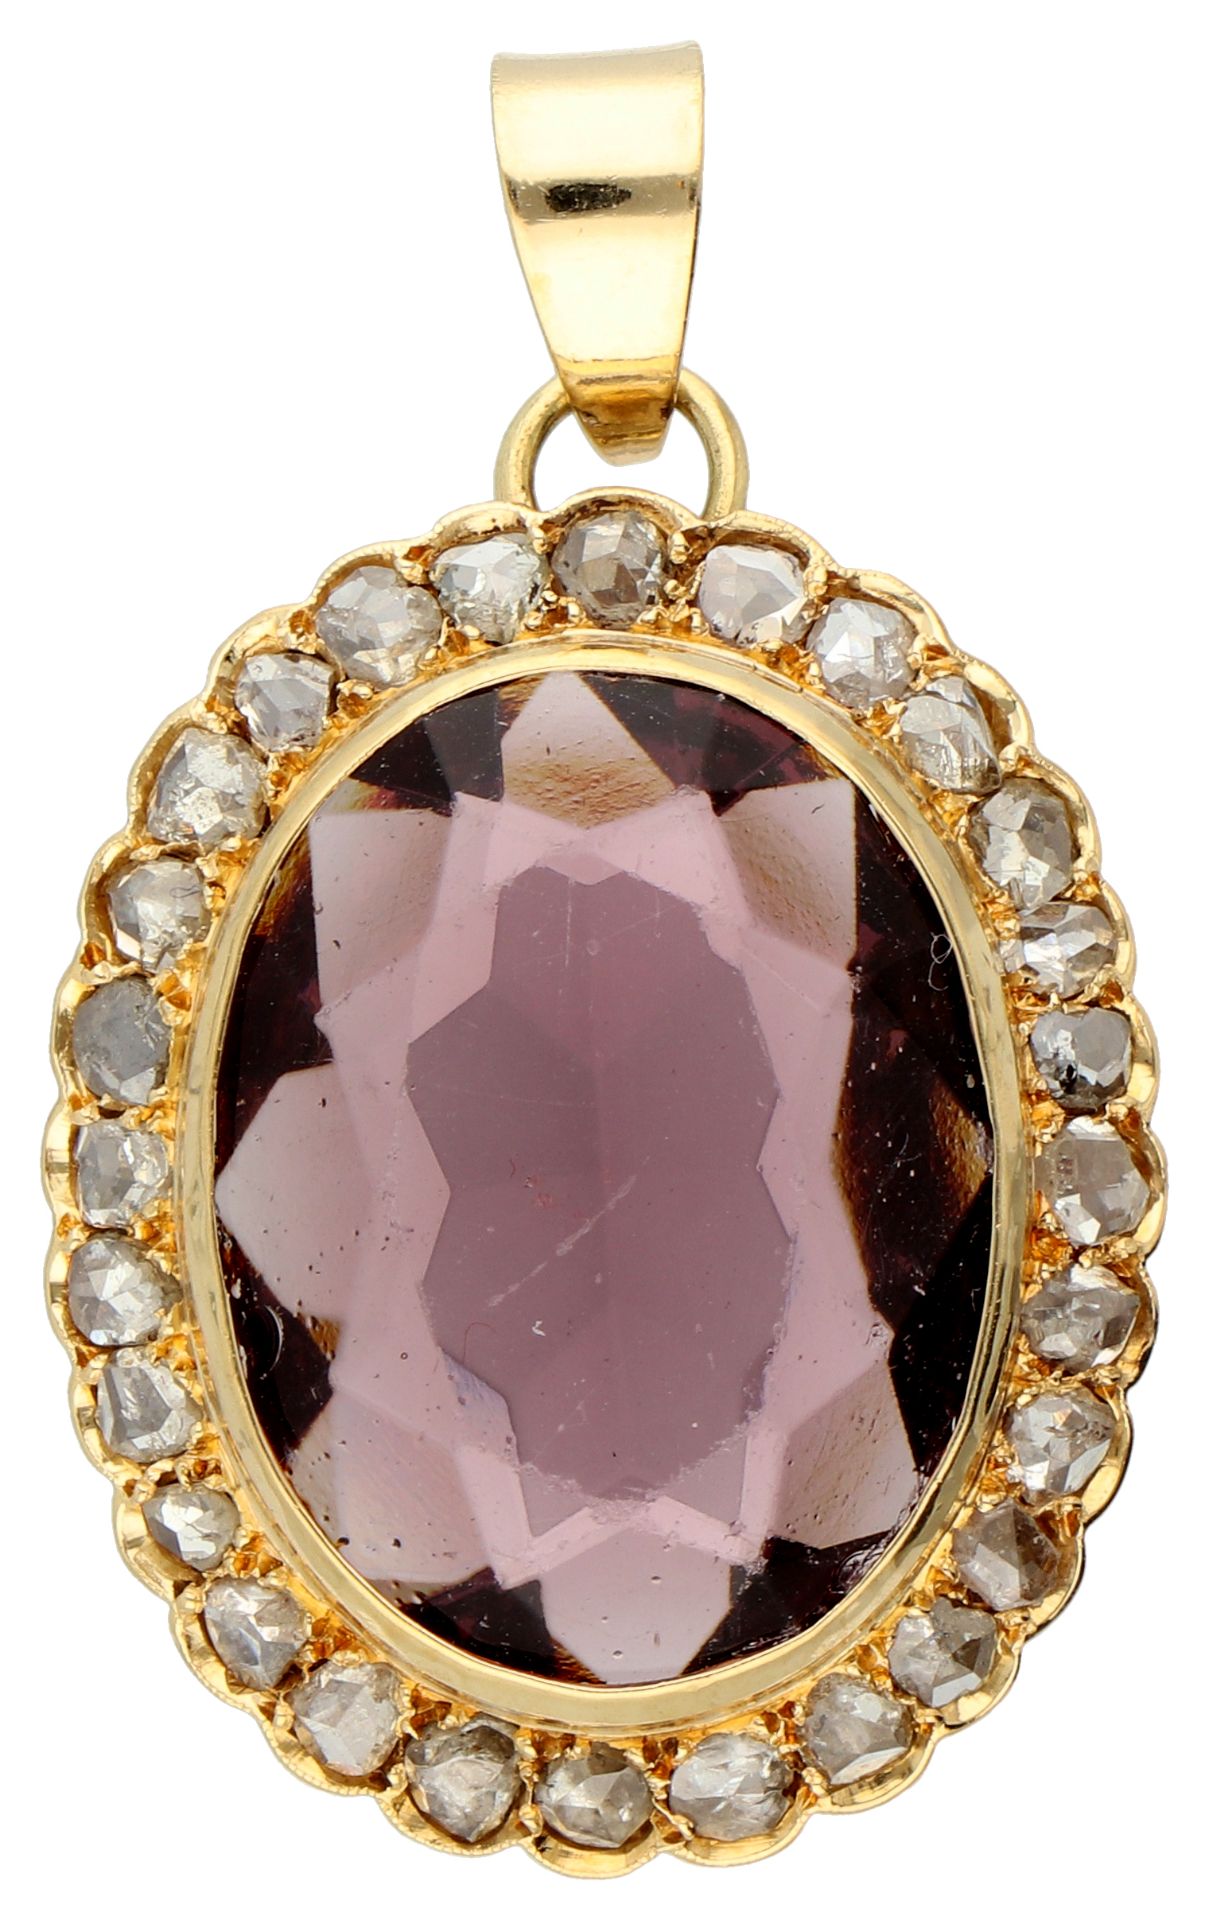 No Reserve - 14K Yellow gold vintage entourage pendant set with a purple color stone and rose cut di